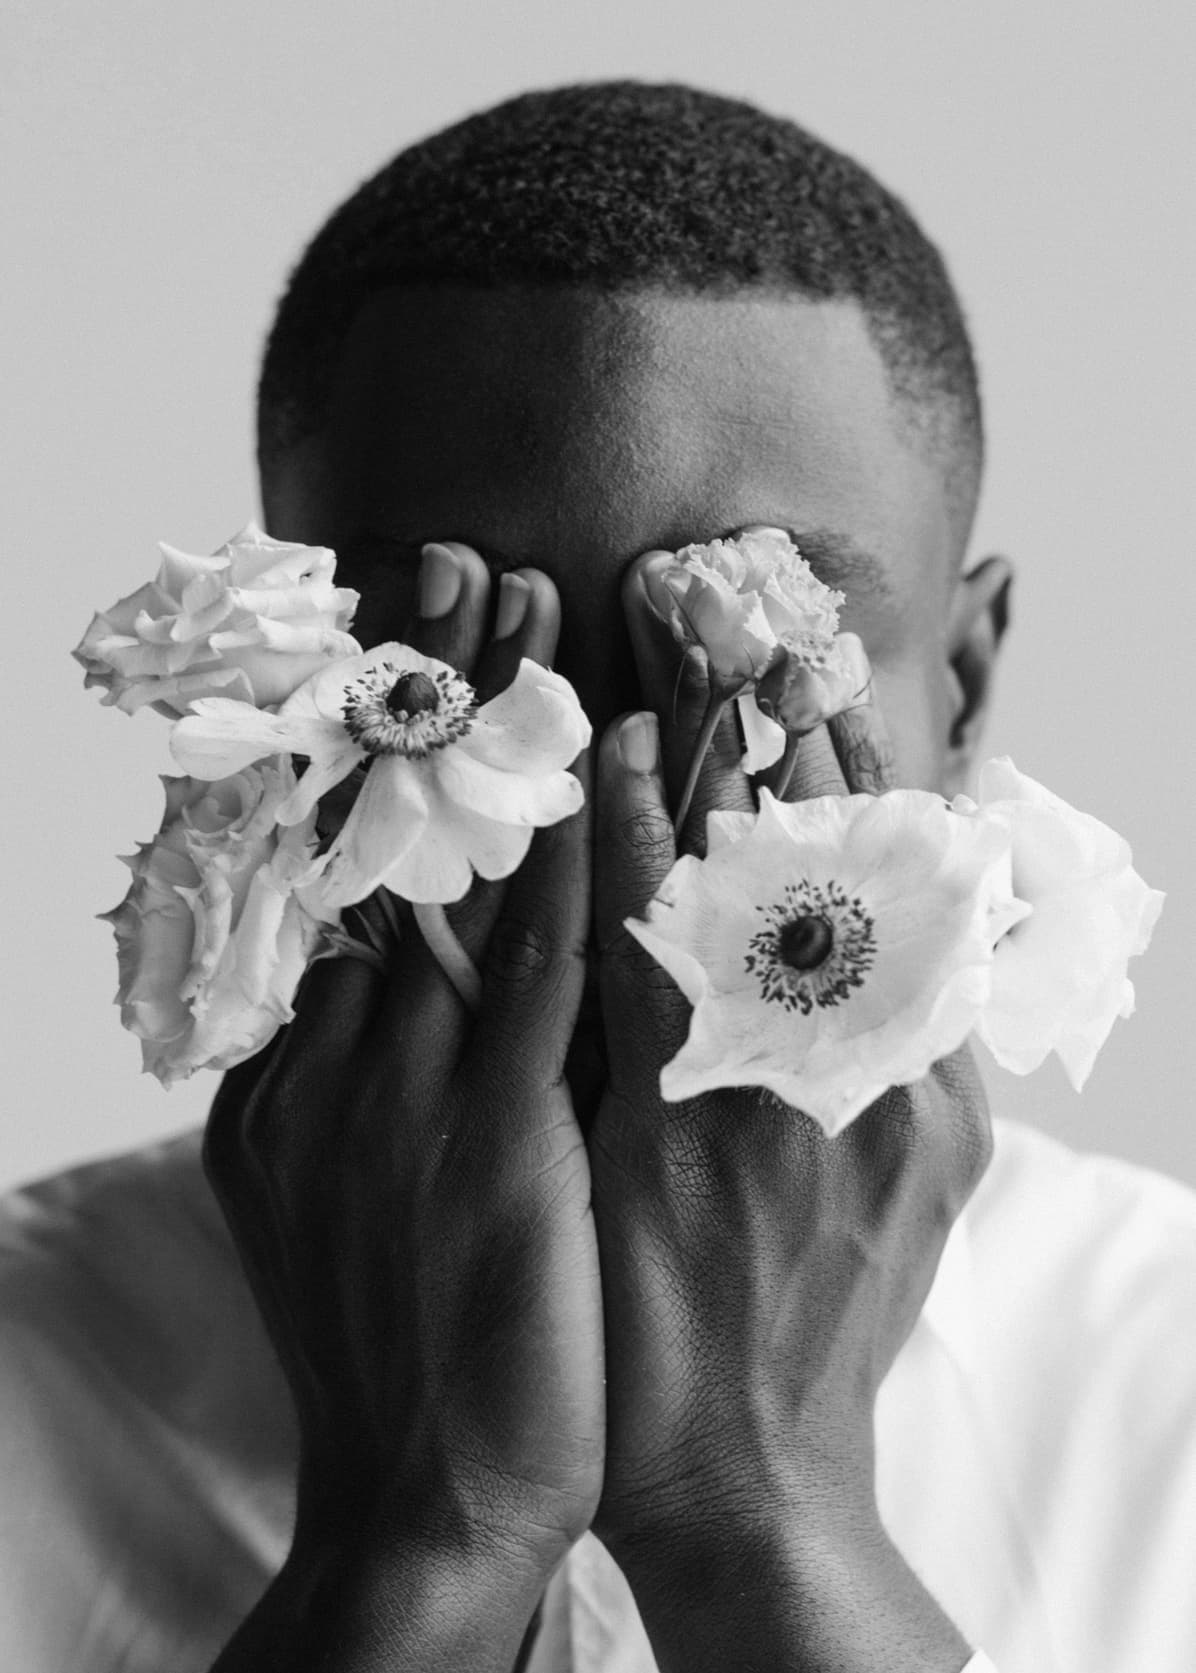 Close Up portrait of a man holding flowers against his face.